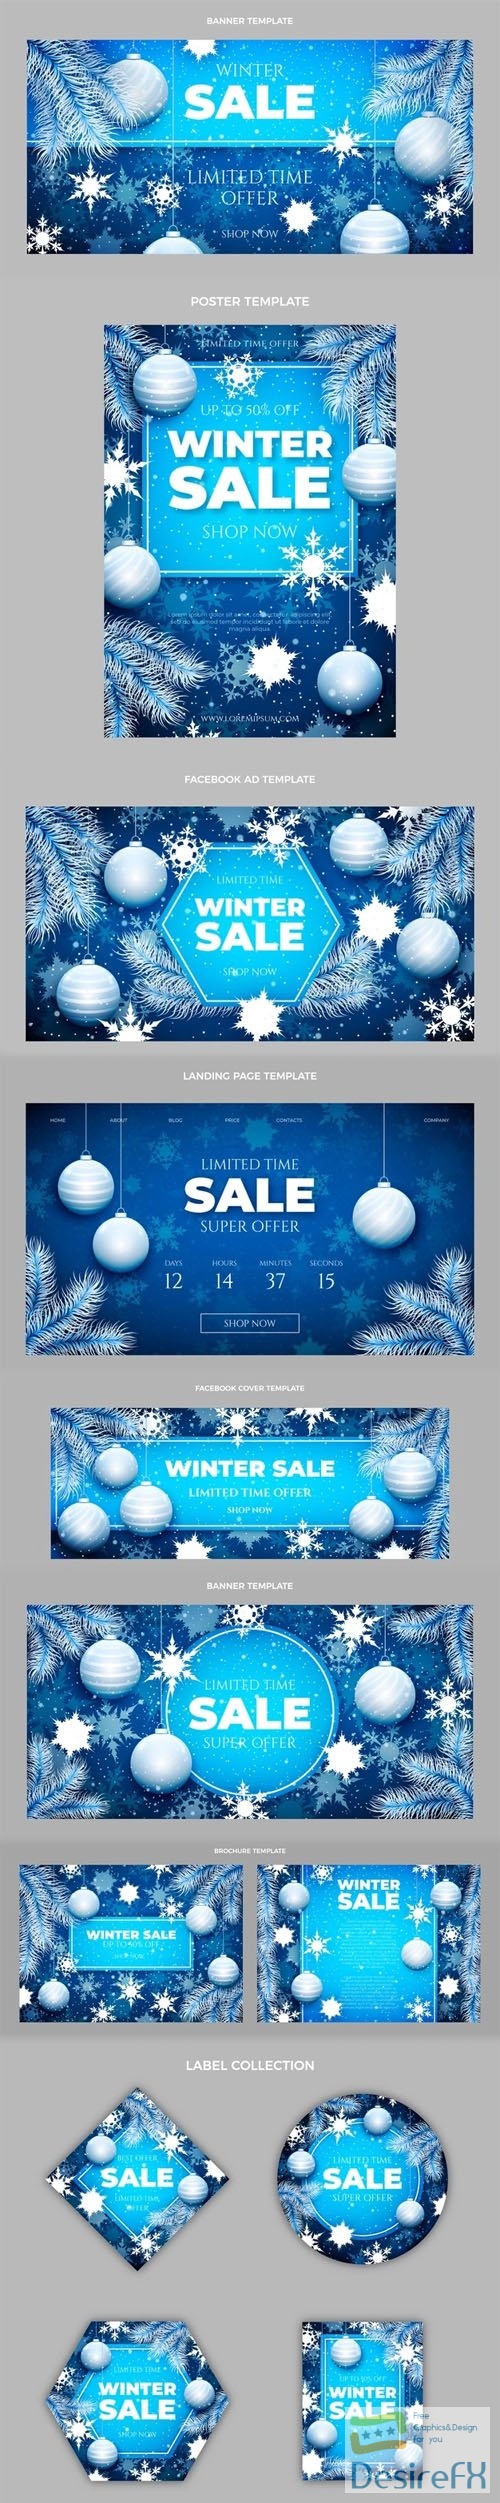 Realistic Winter Sales Vector Templates Collection